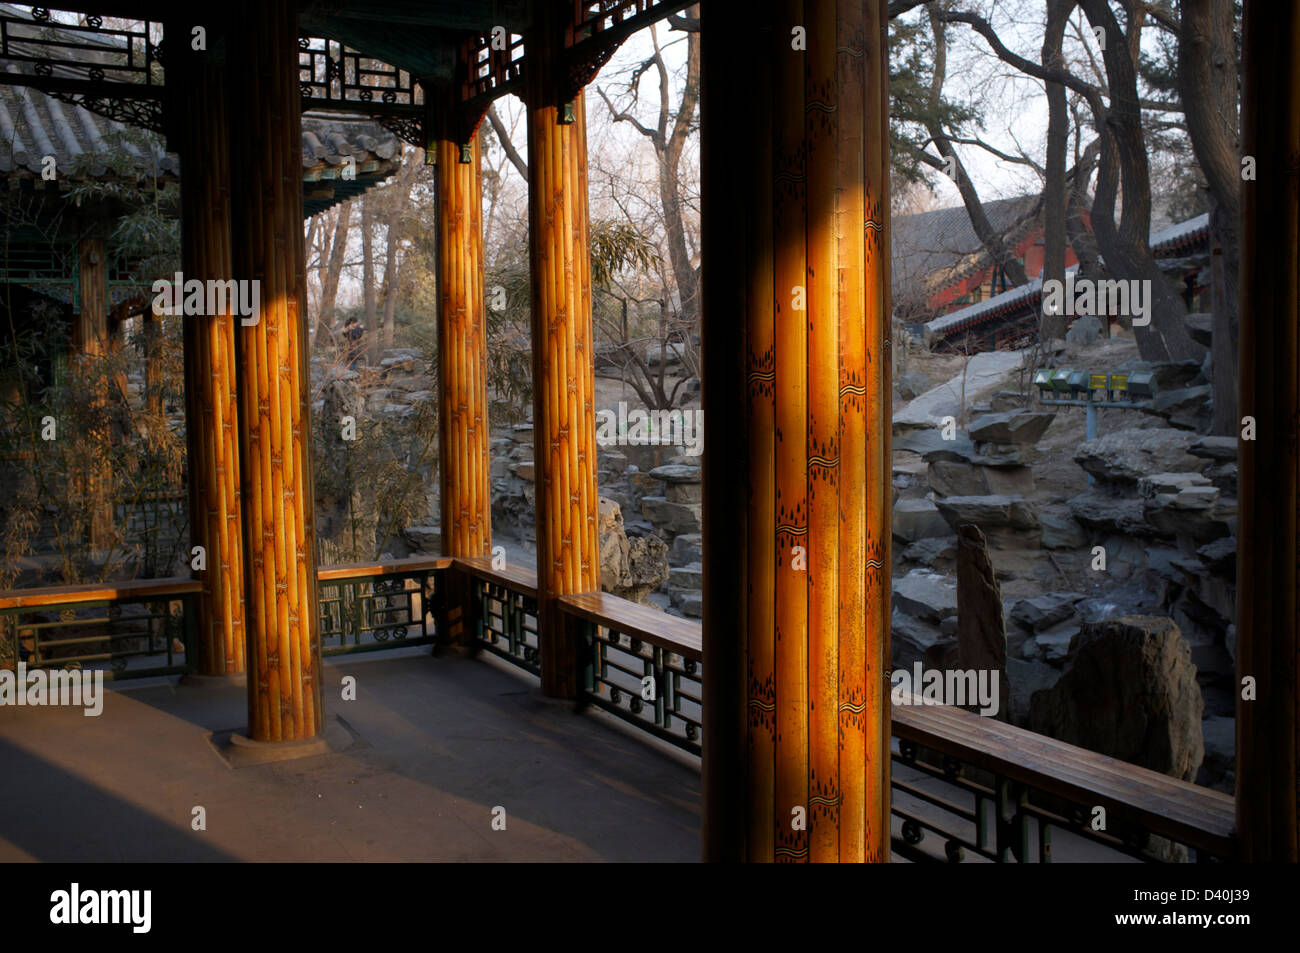 Pavilion pillars in The Prince Gong's Mansion in Beijing, China. 23-Feb-2013 Stock Photo